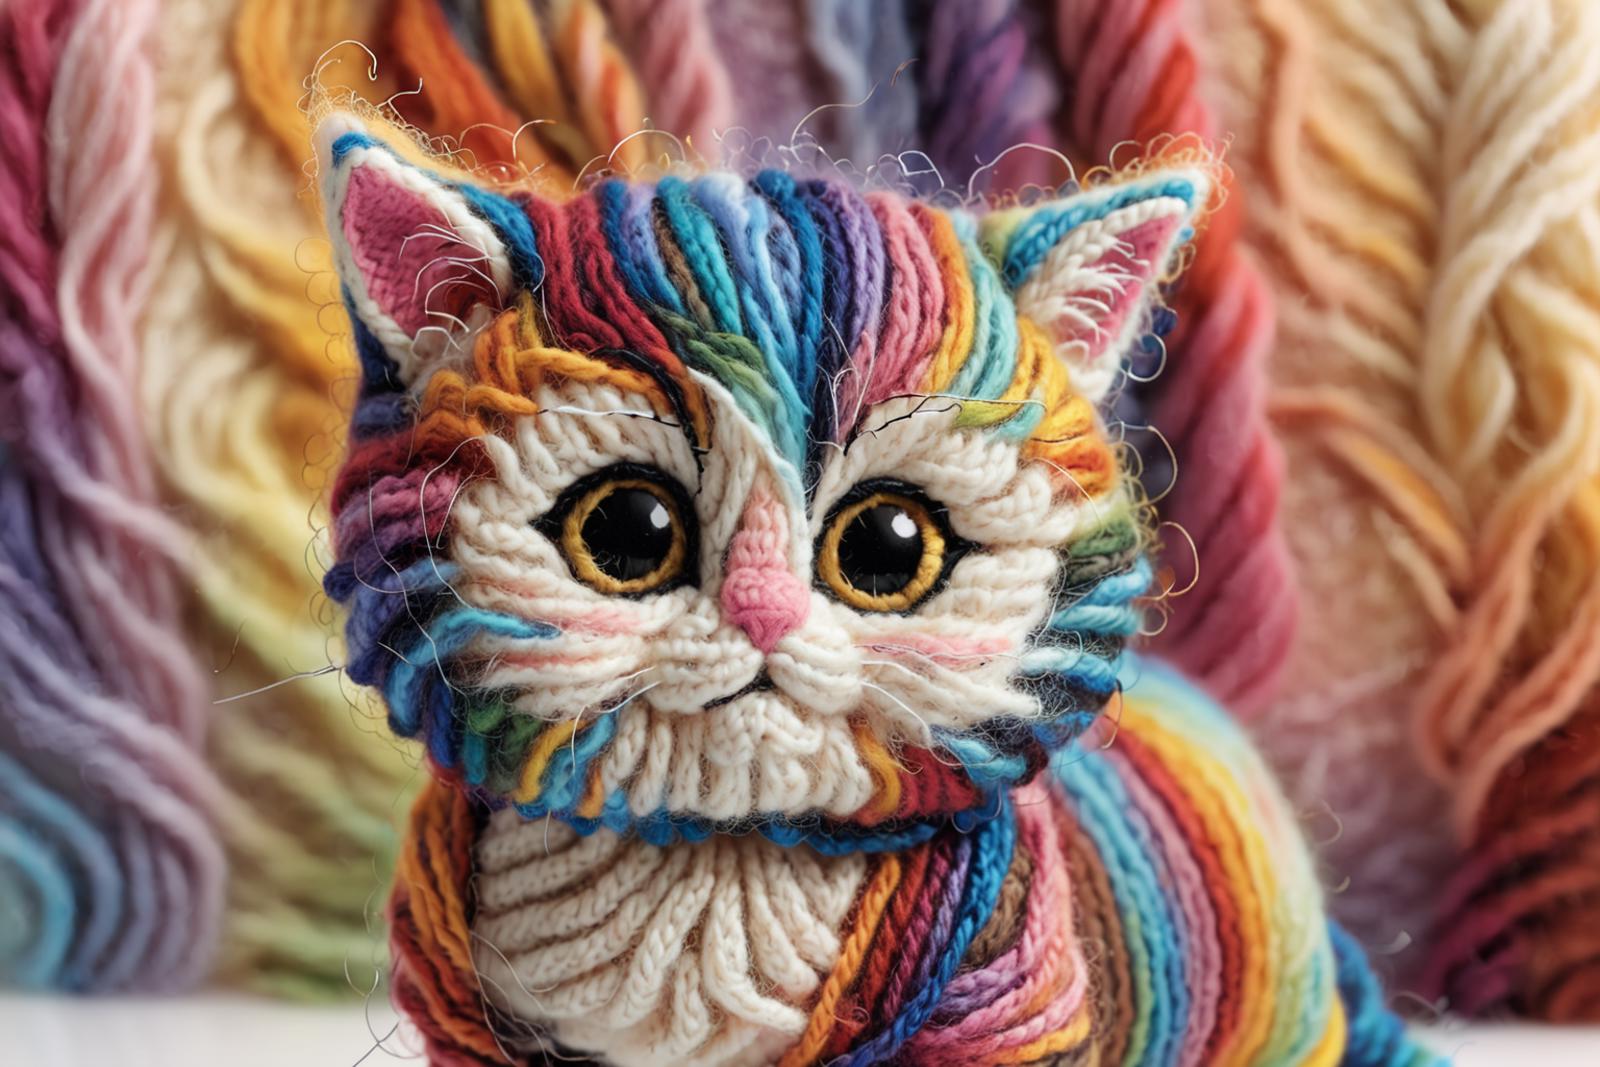 A colorful crocheted cat with yarn around its neck.